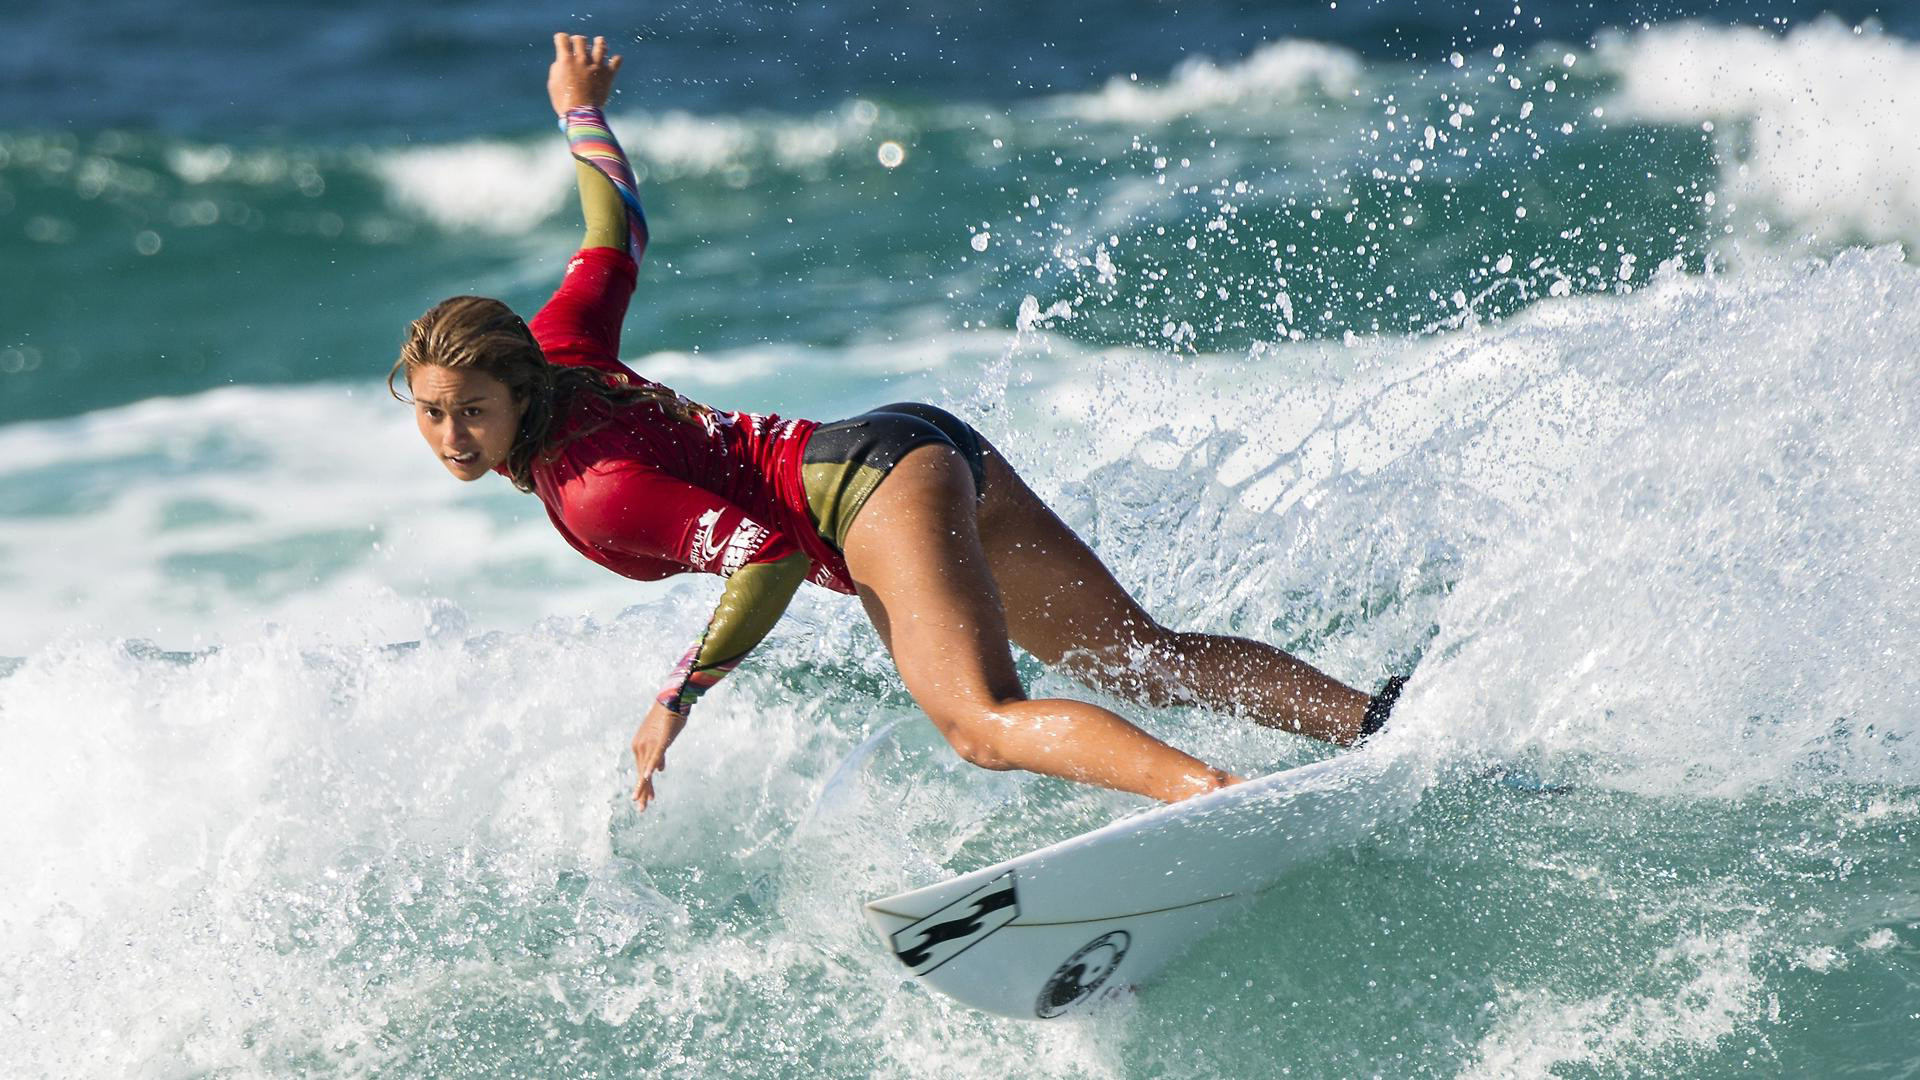 Surfing Girl HD Wallpaper : Get Free top quality Surfing Girl HD Wallpaper  for your desktop